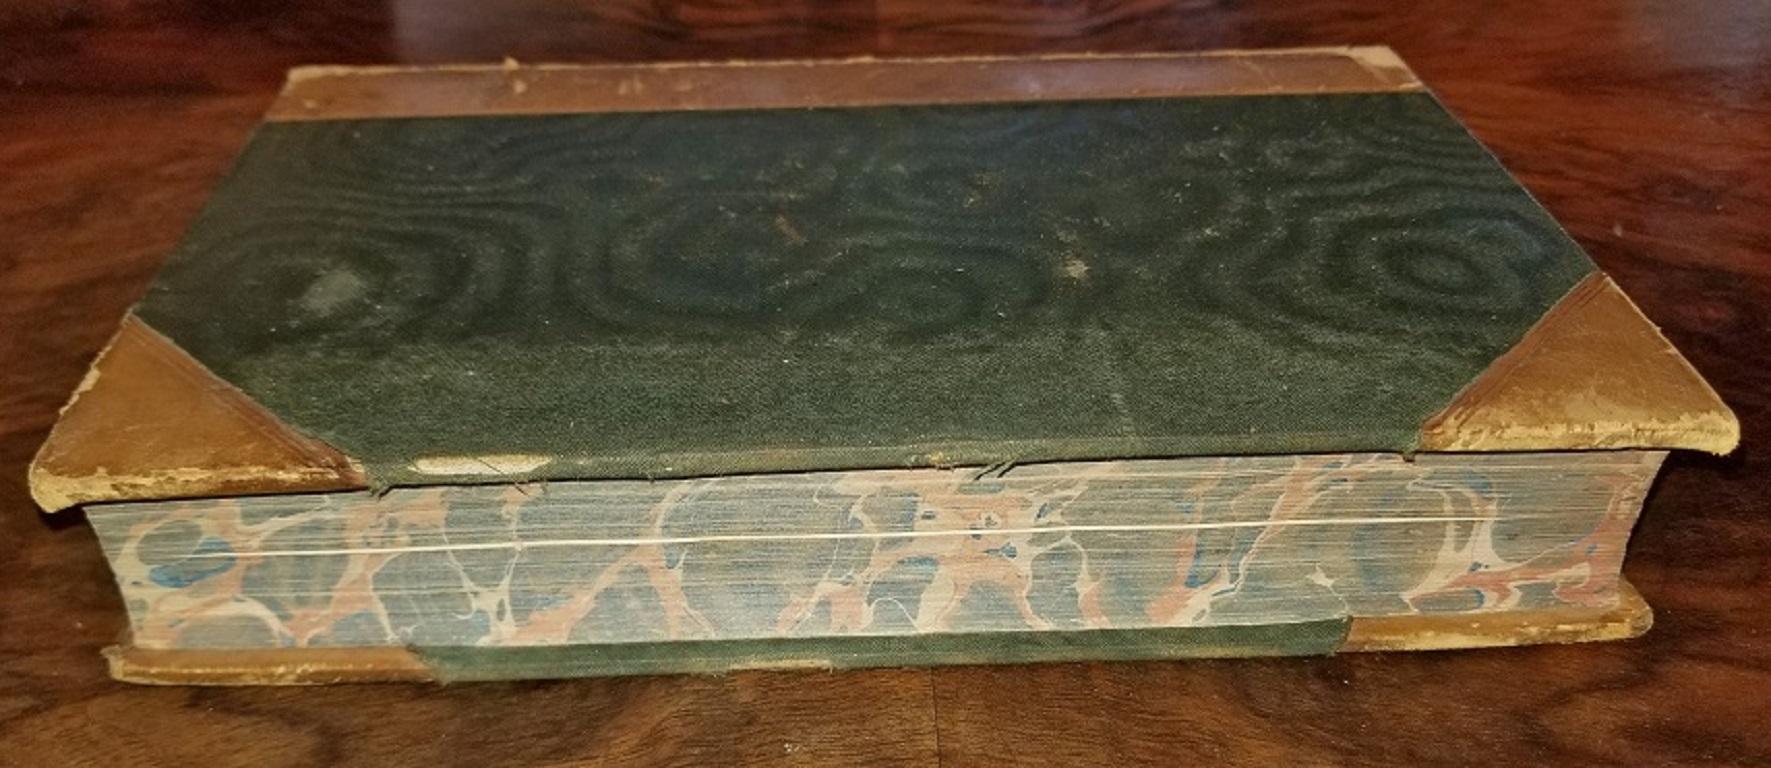 The Koran The Alcoran of Mohammed by George Sale 1844 4